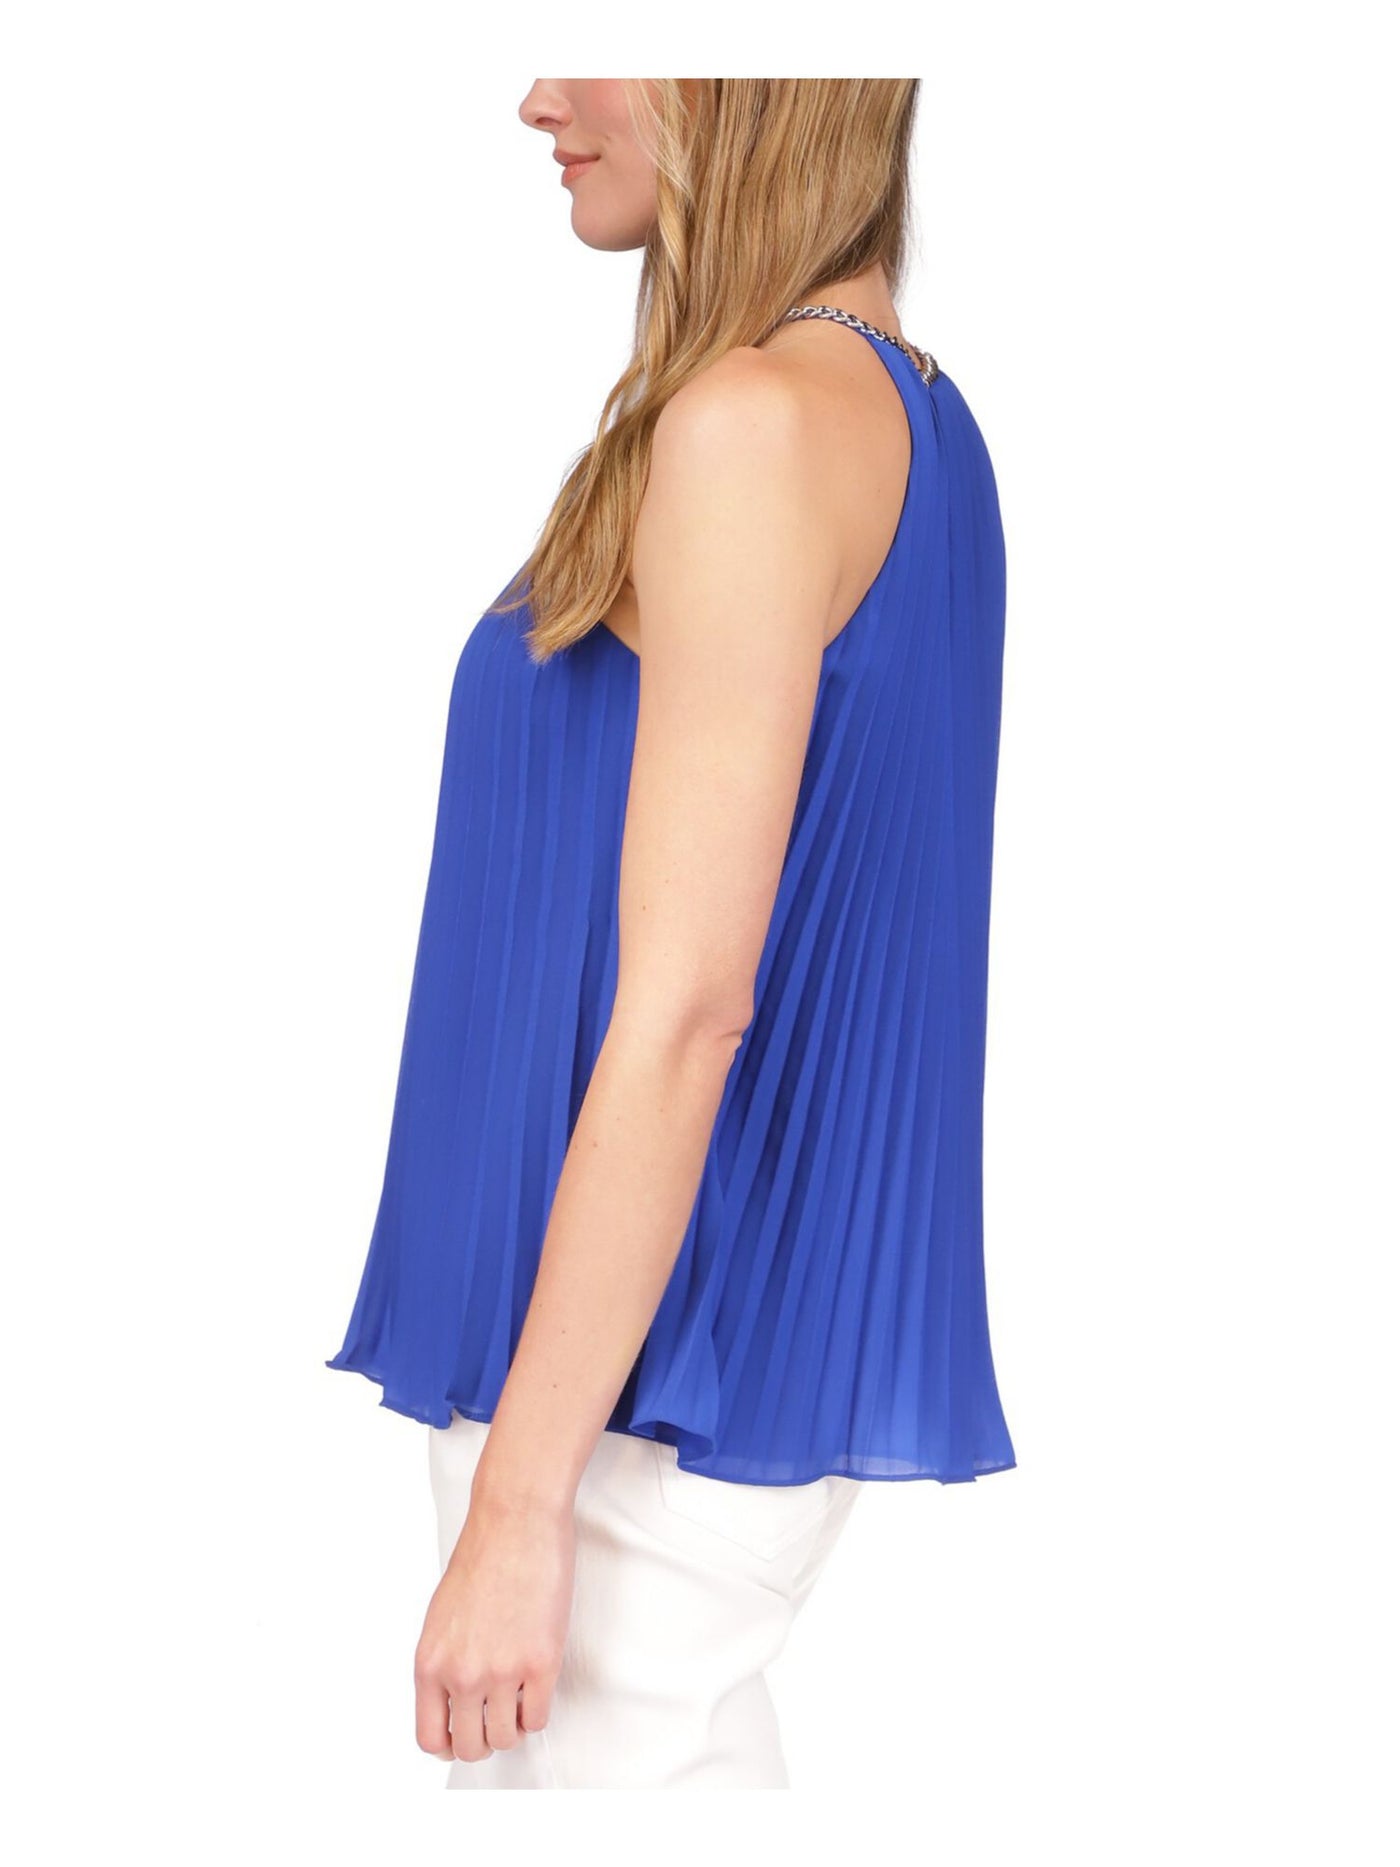 MICHAEL MICHAEL KORS Womens Blue Pleated Lined Chain Detail Sleeveless Halter Top S